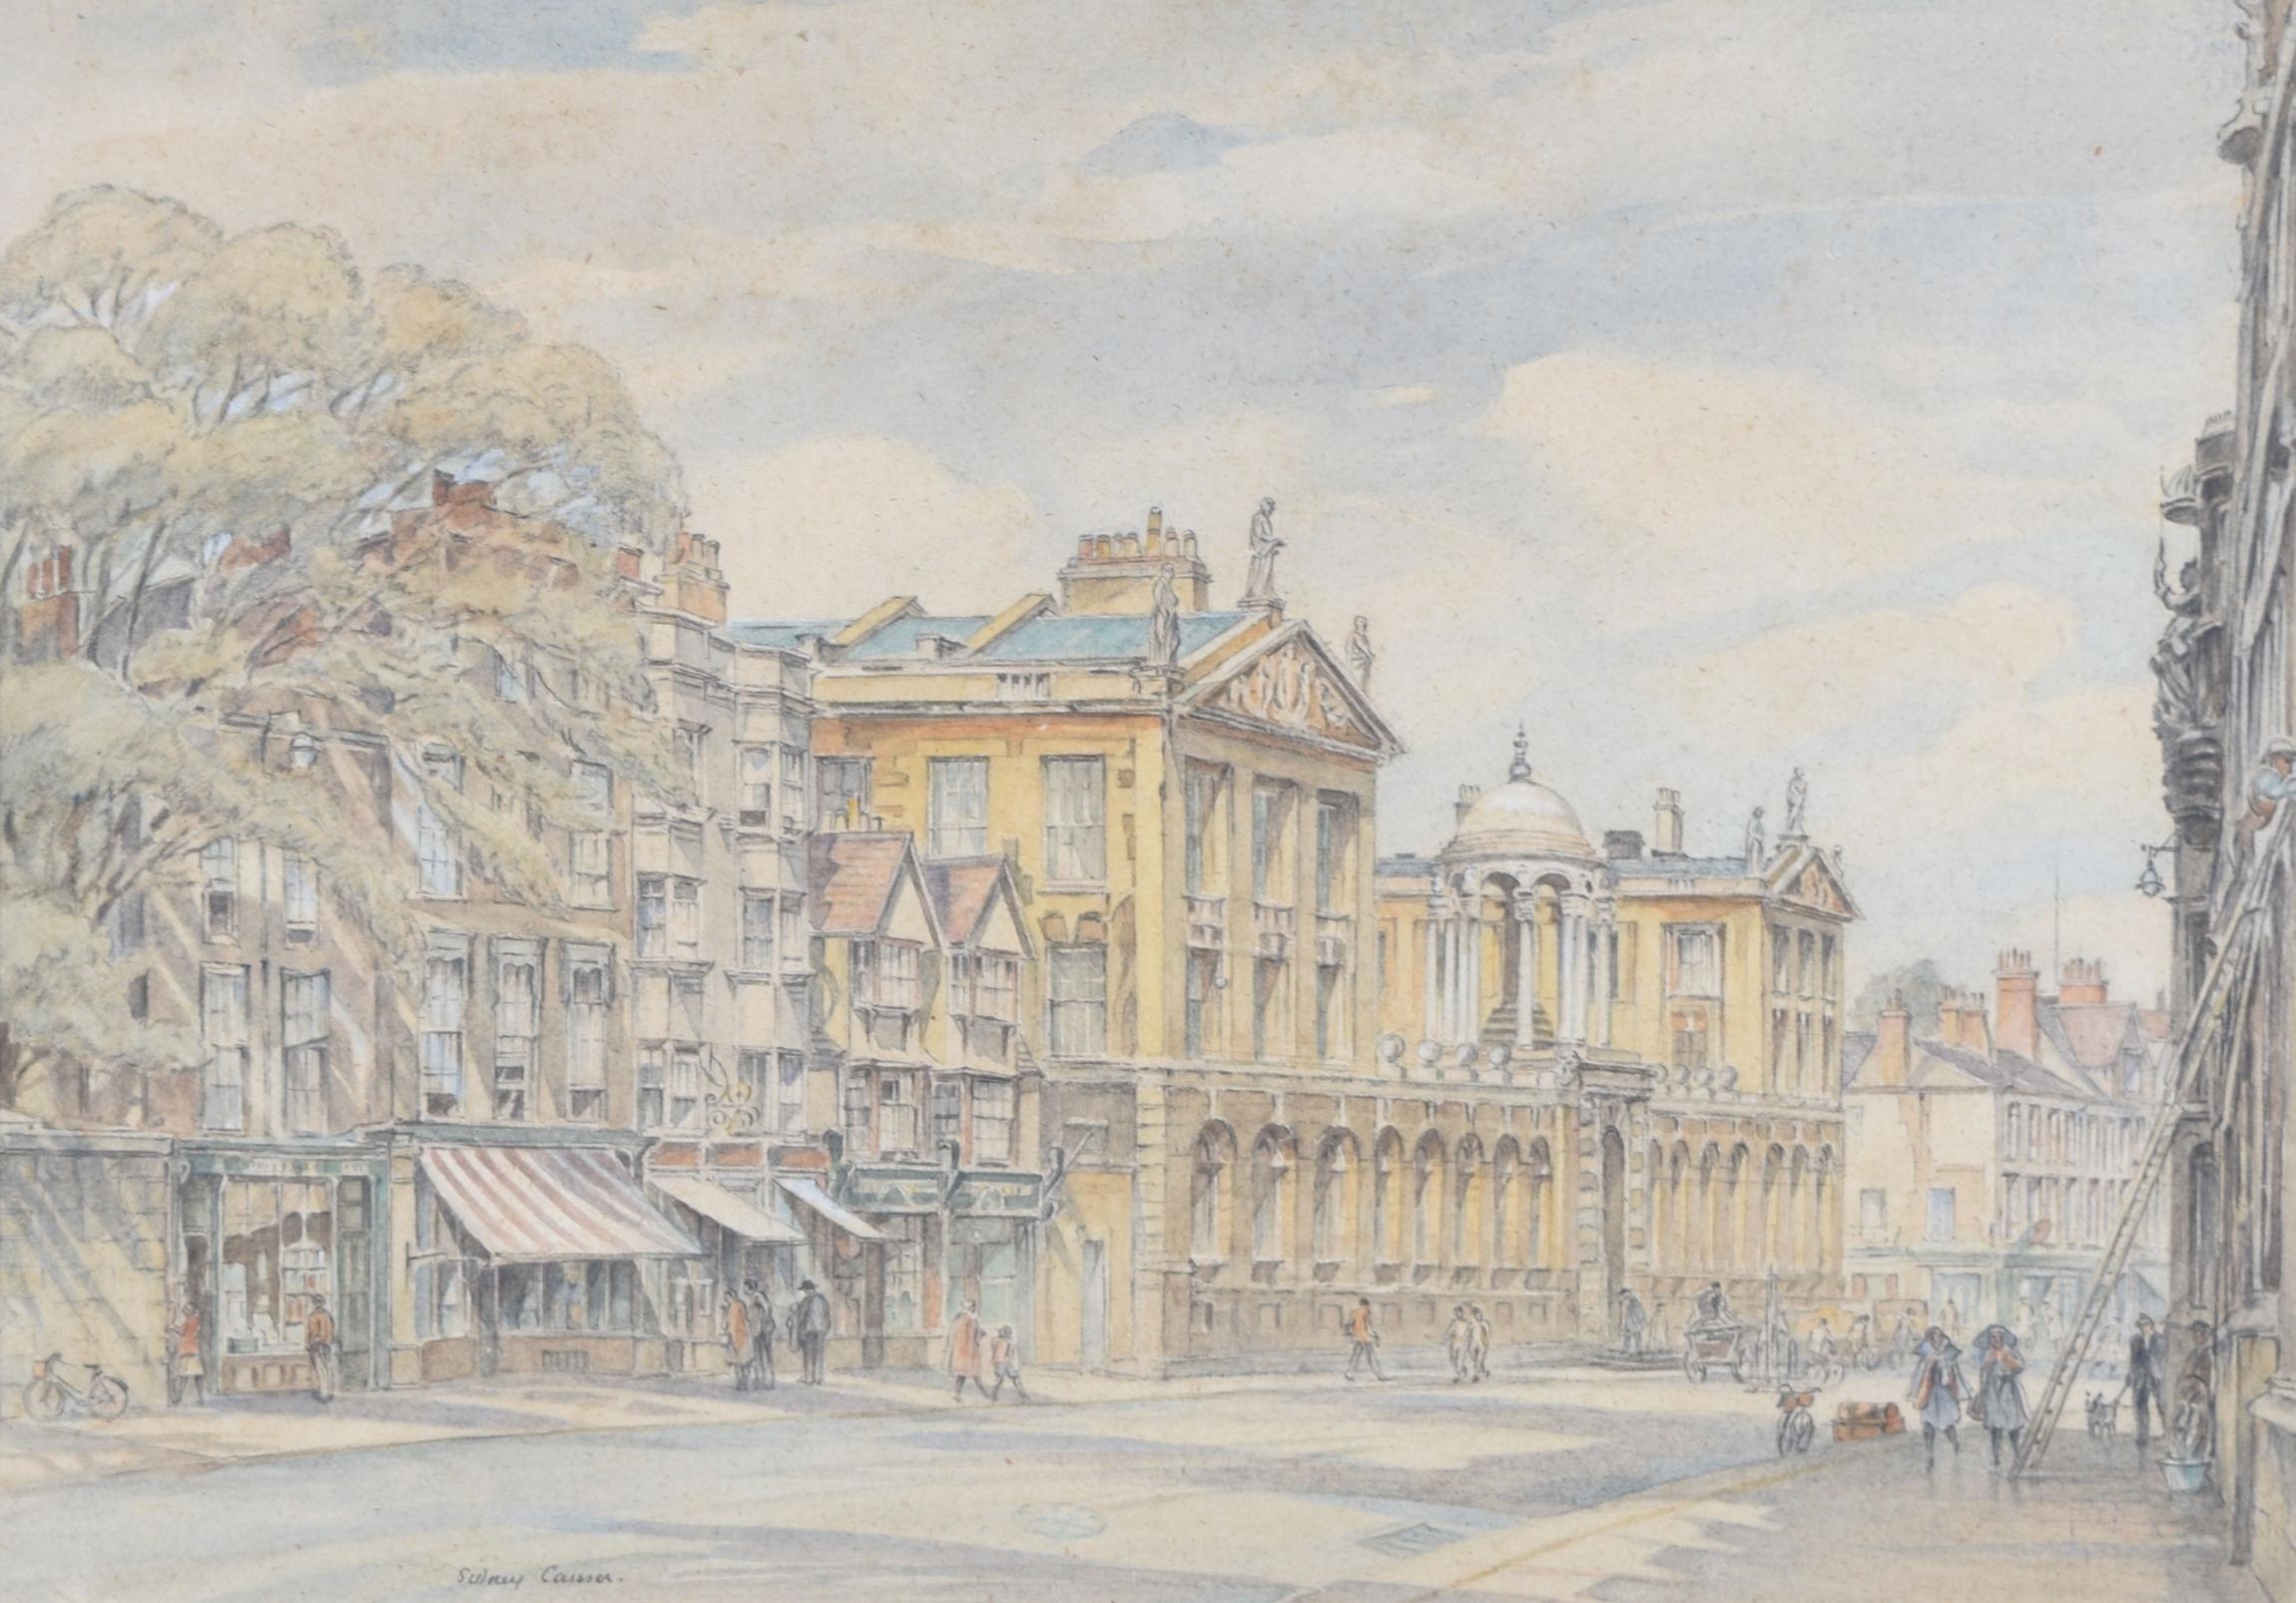 To see our other views of Oxford and Cambridge, scroll down to "More from this Seller" and below it click on "See all from this Seller" - or send us a message if you cannot find the view you want.

William Sydney Causer (1876 - 1958)
Queen's